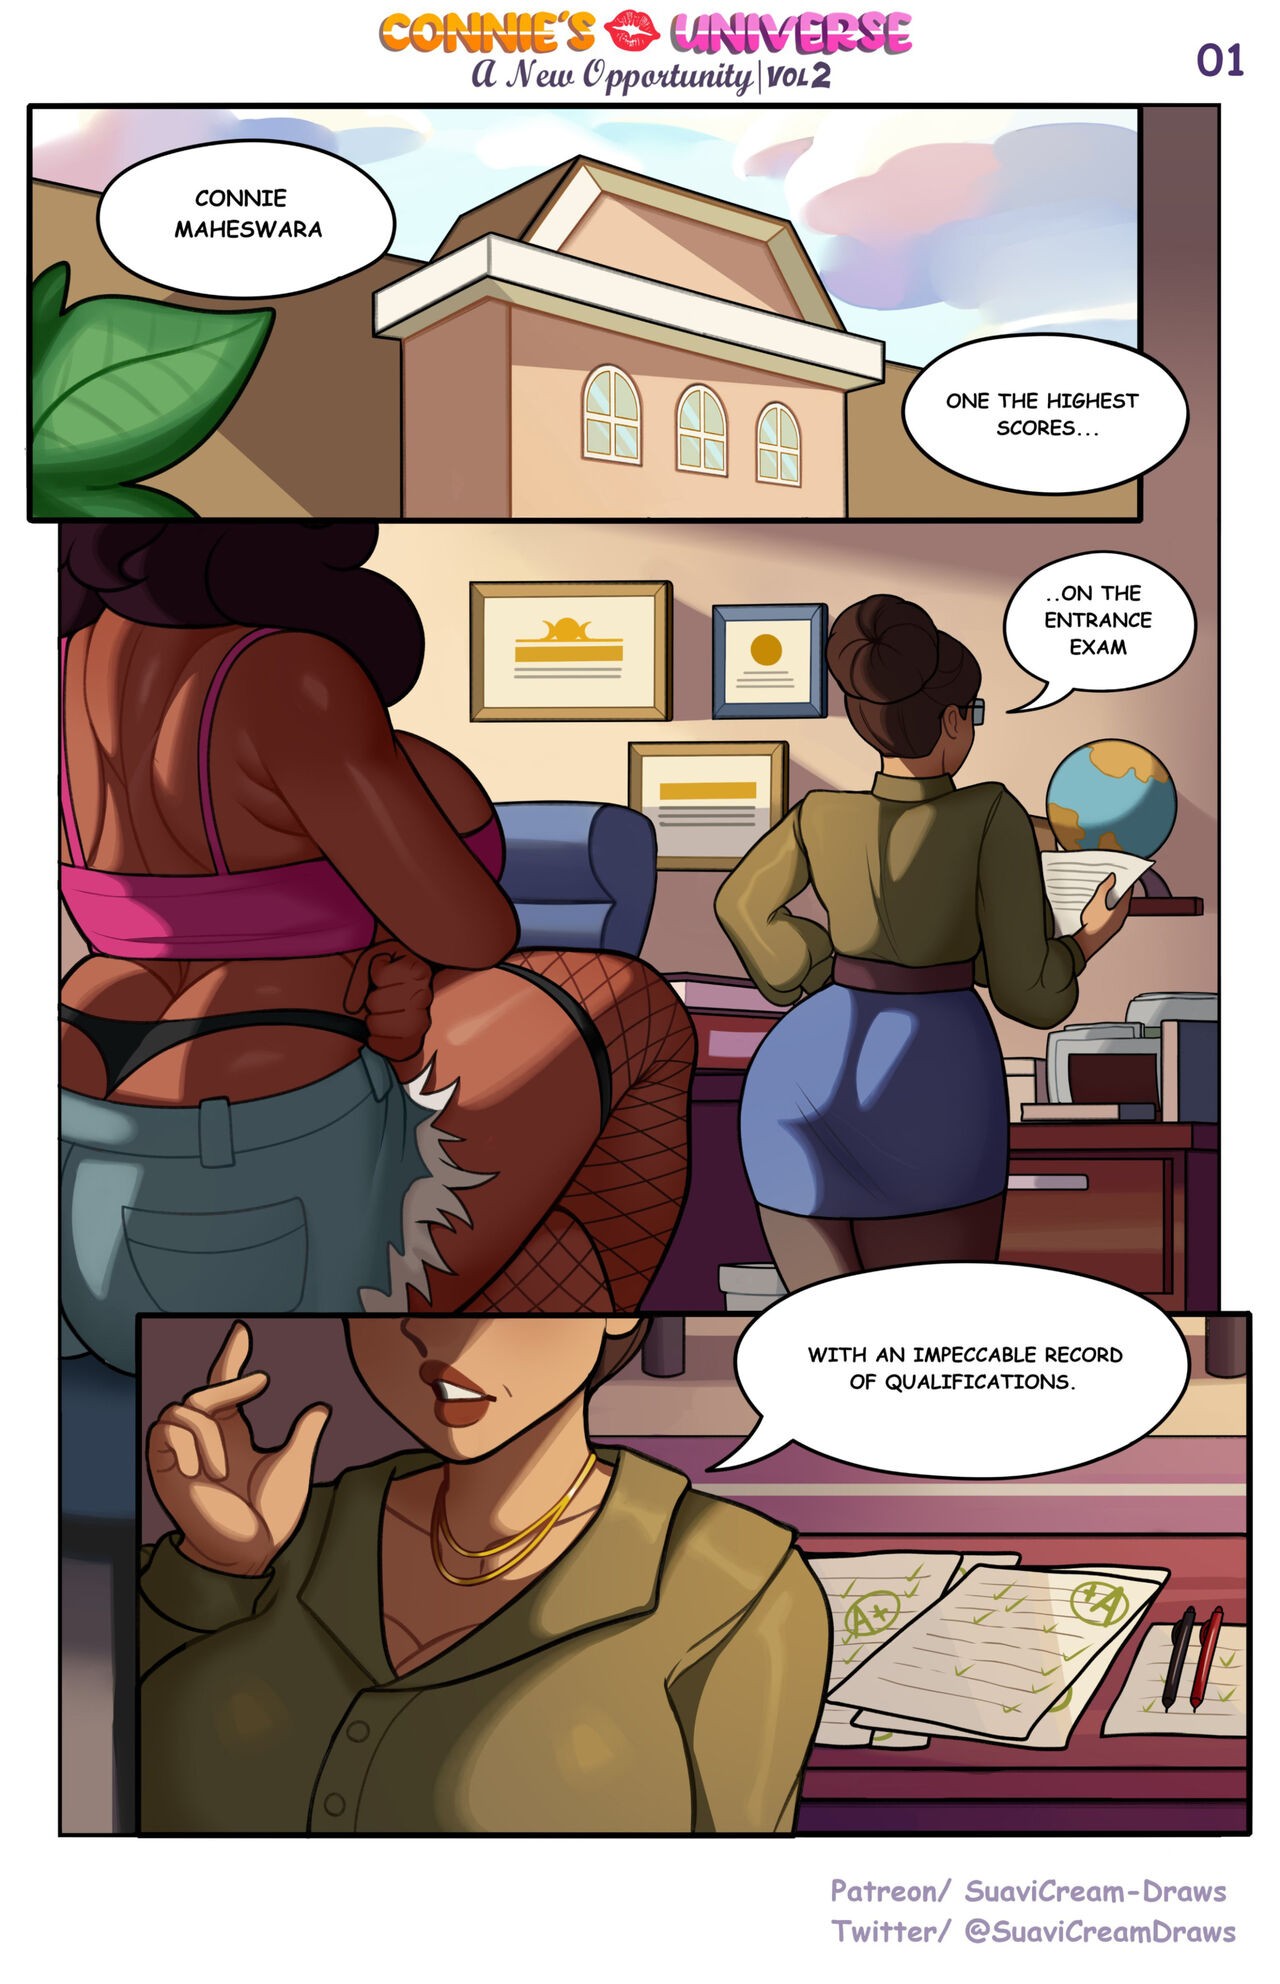 Connie’s Universe: A New Opportunity Part 2 Porn Comic english 02